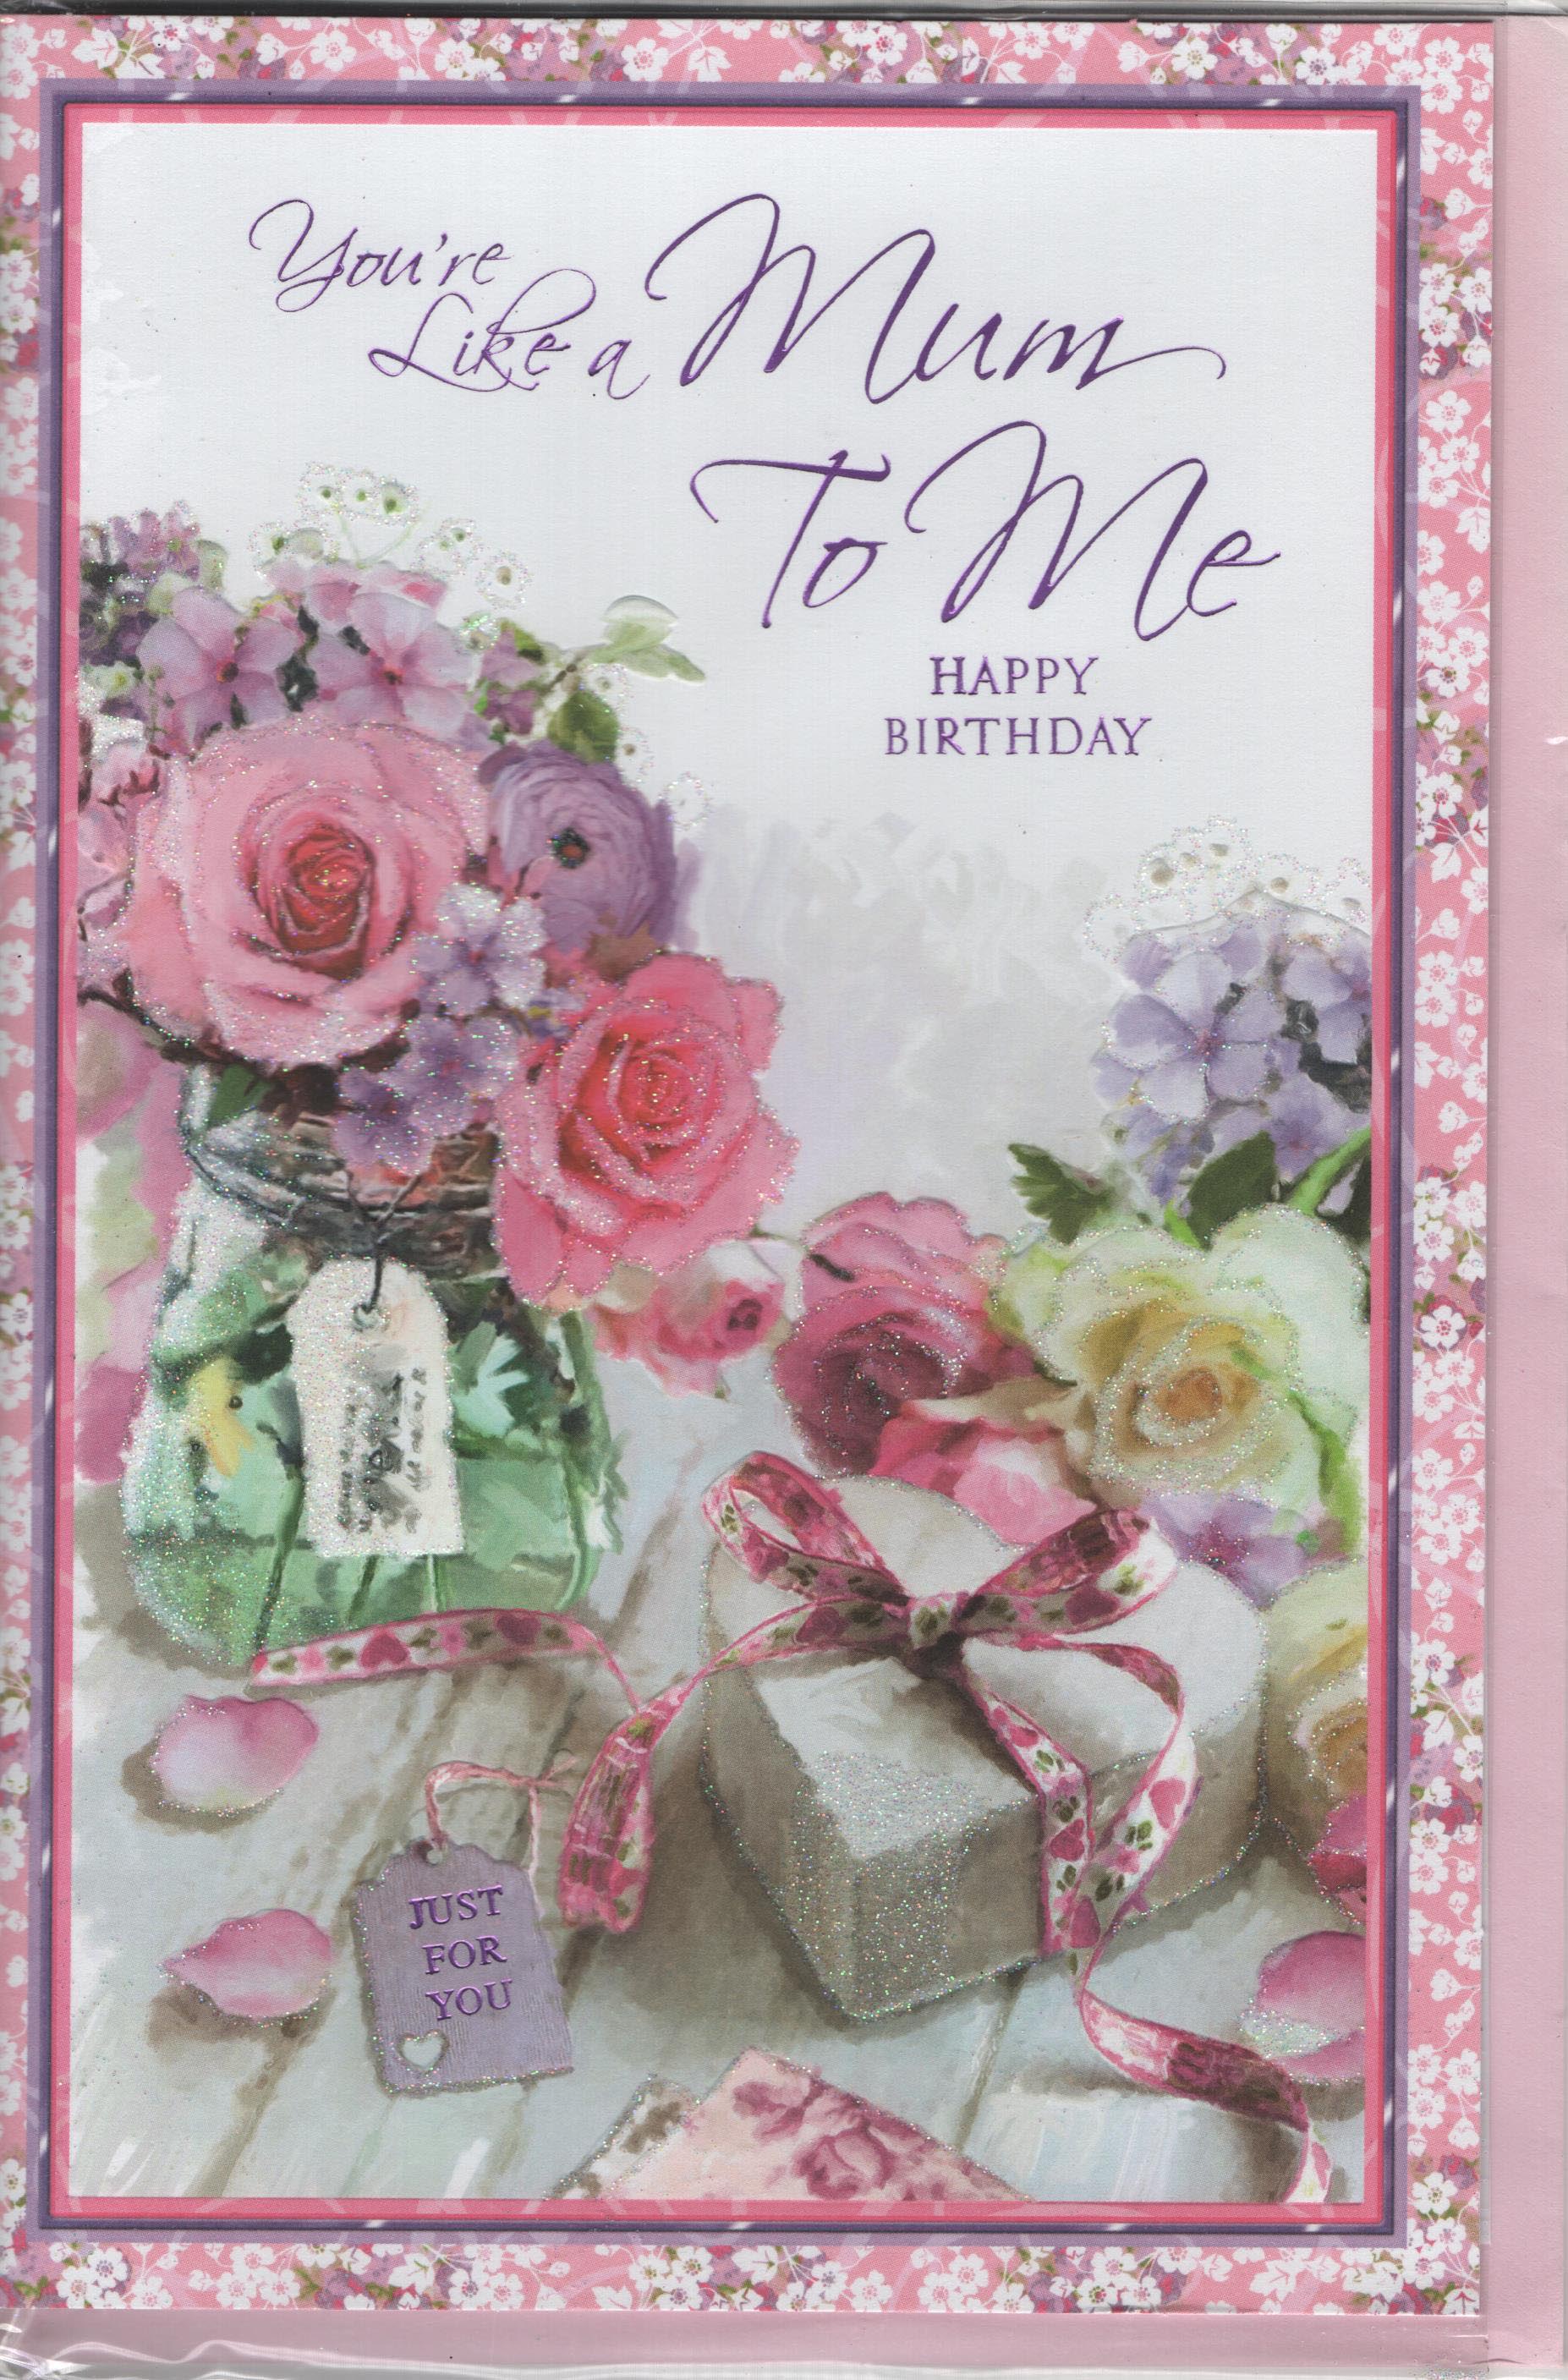 You're Like a Mum to Me Happy Birthday Greeting Card